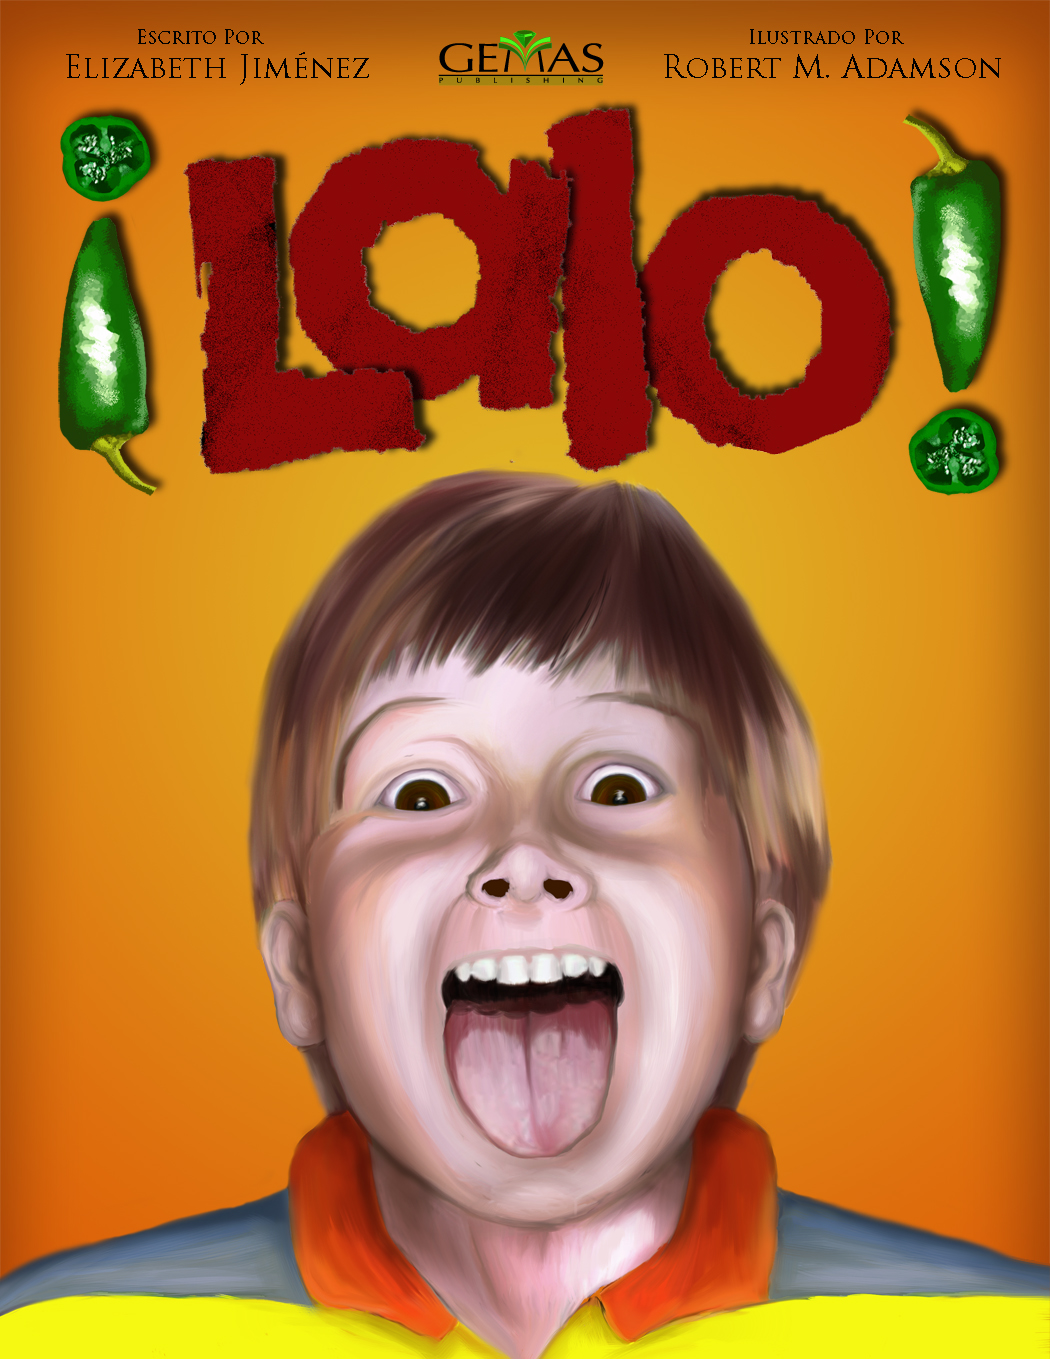 Cover of the book titled Lalo.